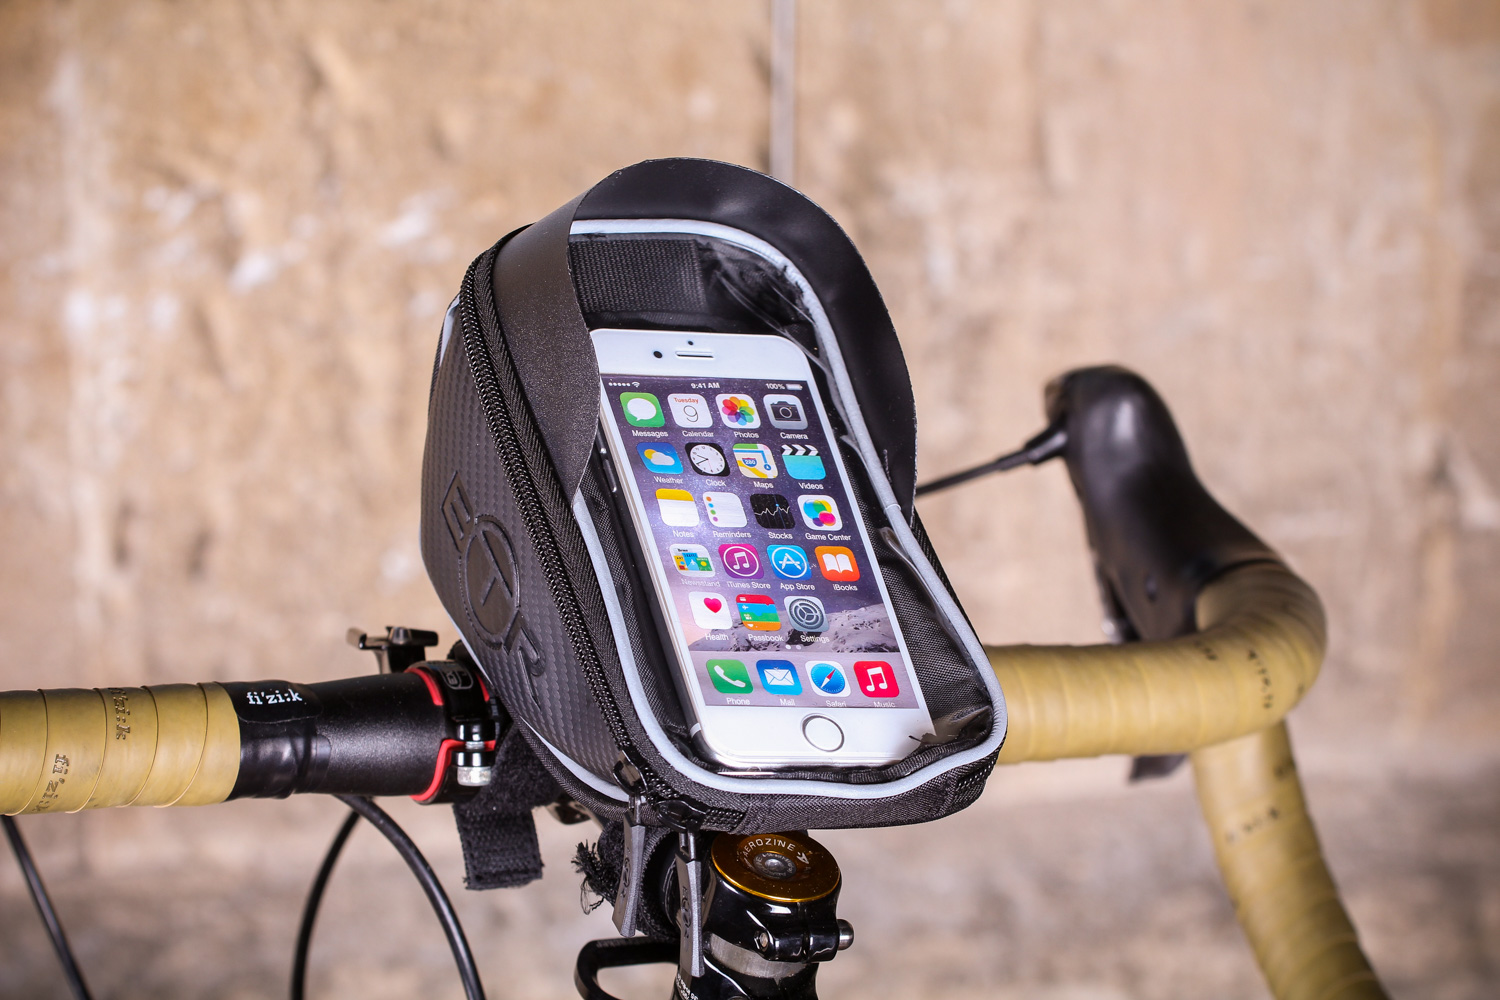 Bonaweite Waterproof Bike Handlebar Bag Cell Phone Pouch Bicycle & Motorcycle Handlebar Phone Mount Holder Cradle with 360 Rotate for iPhone Xs X 8 7 6S Plus Samsung HTC LG Smartphone up to 6 